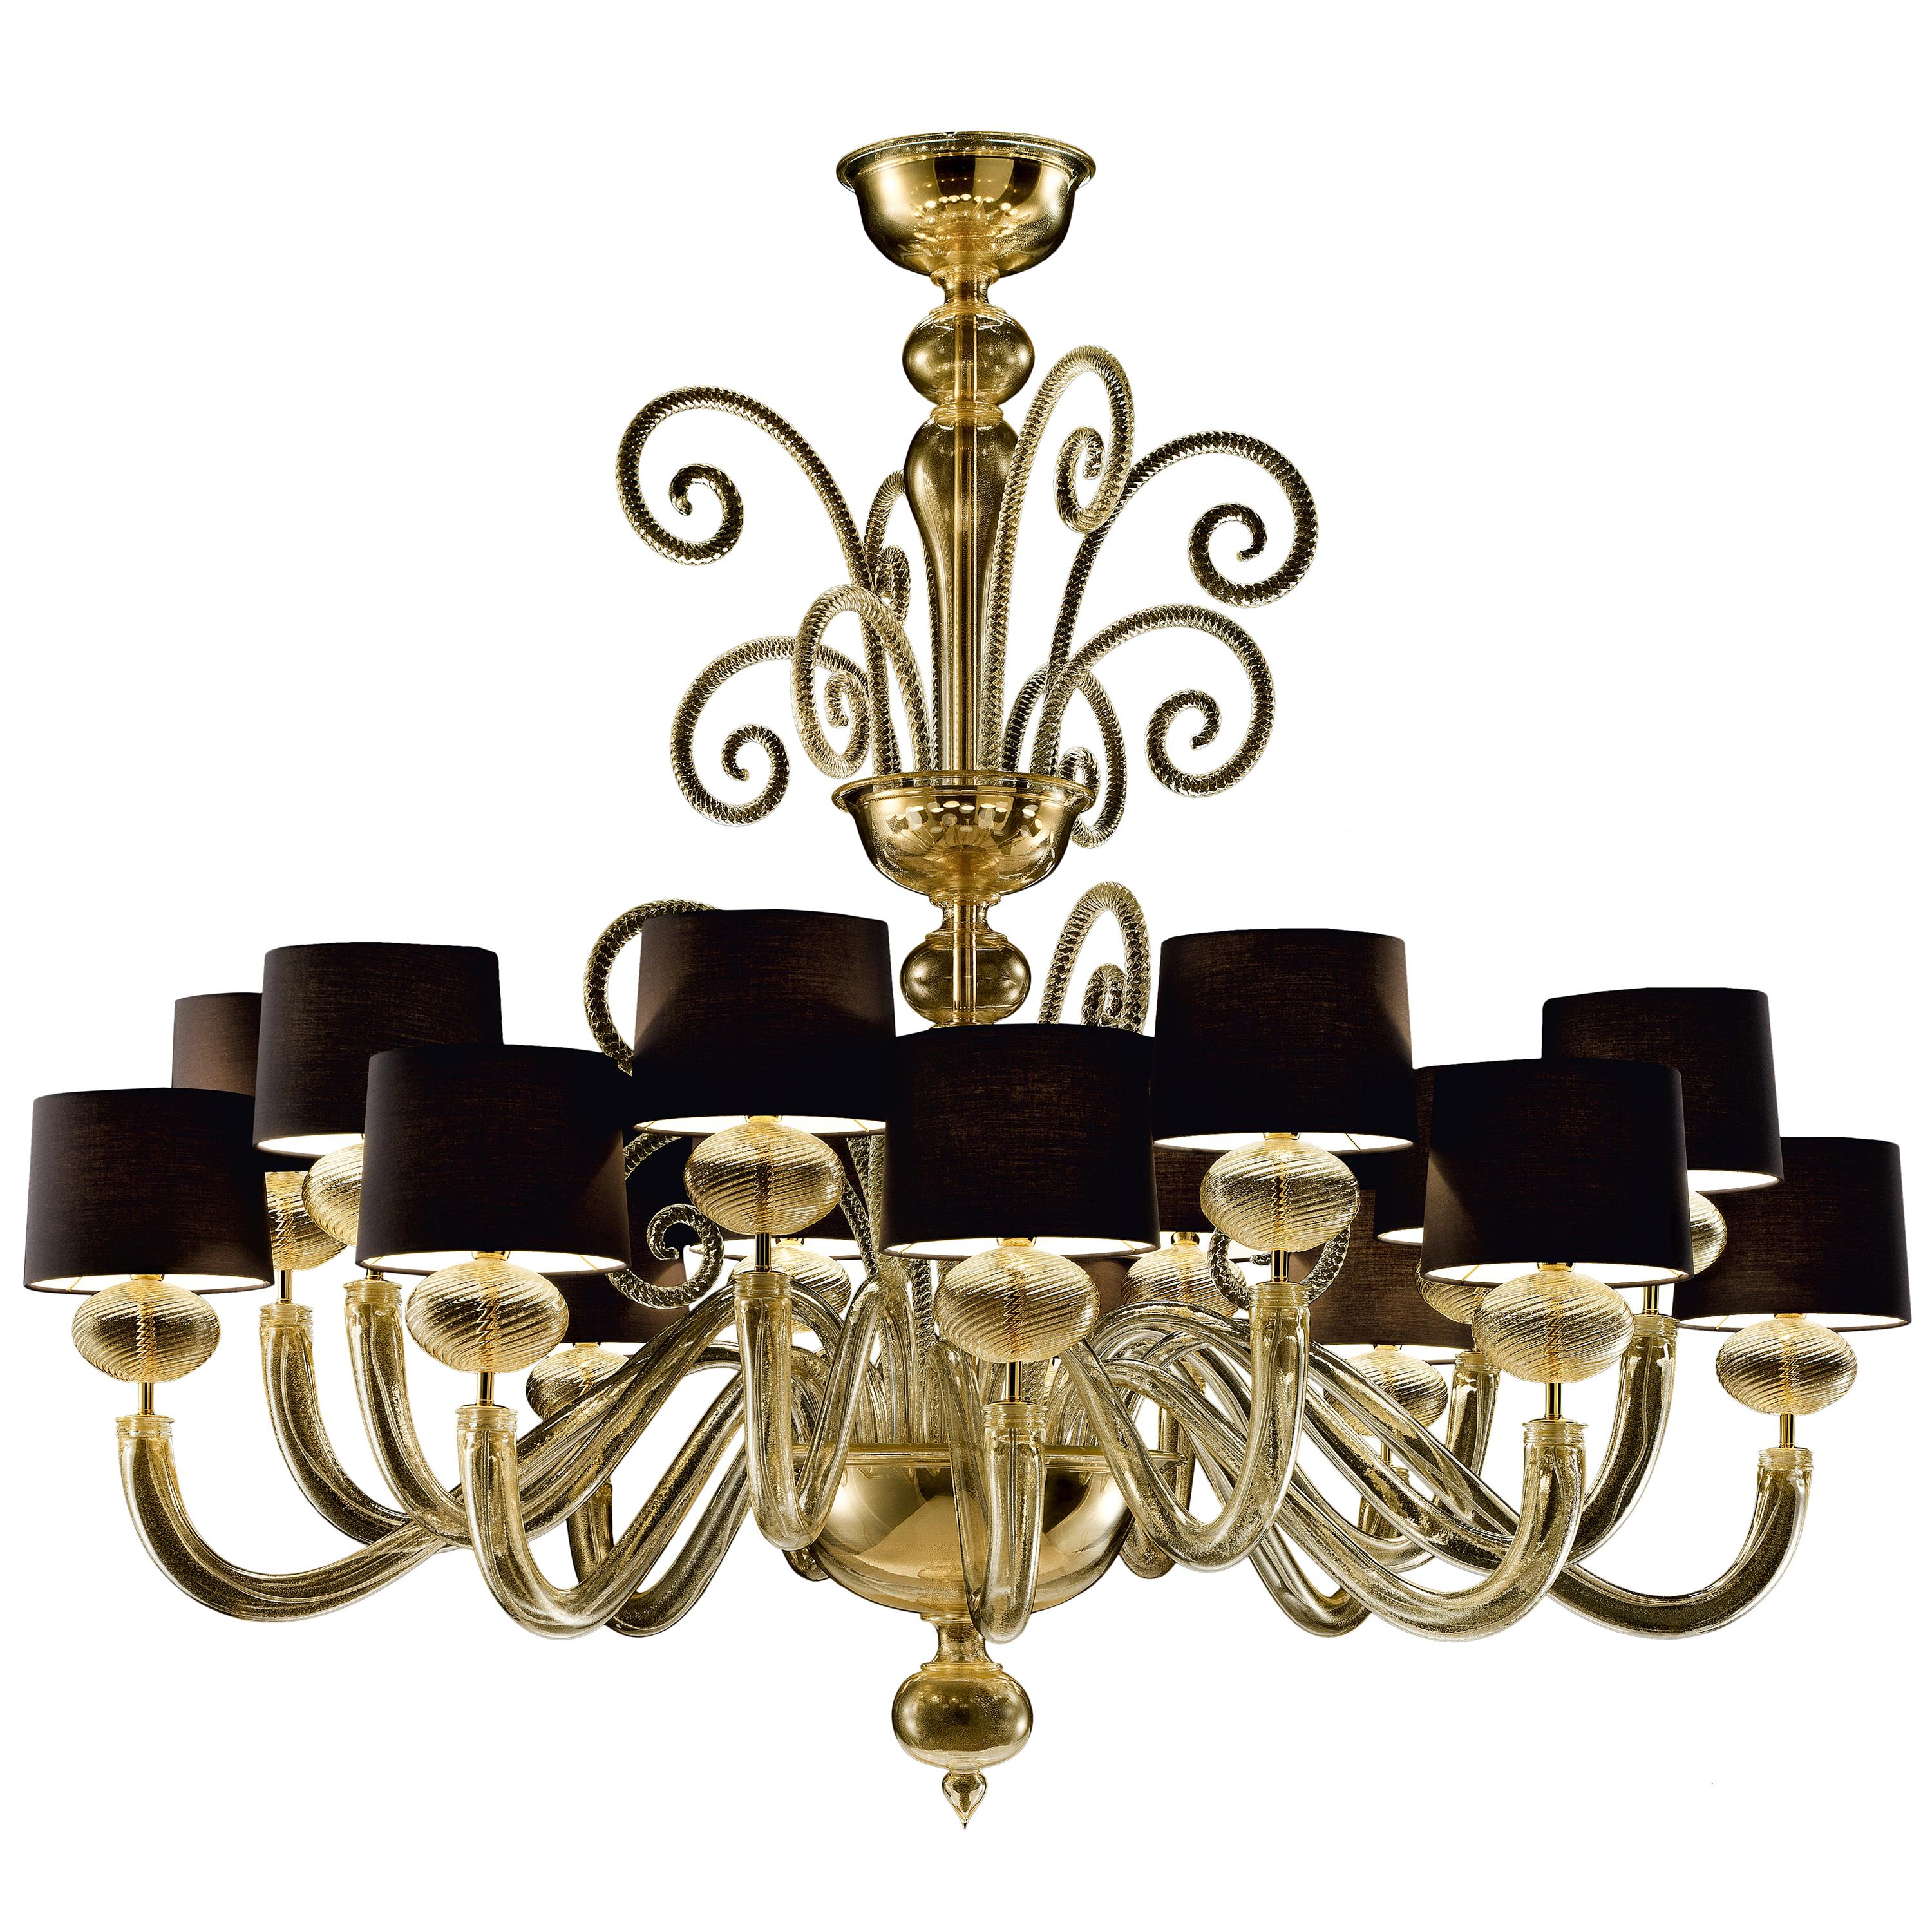 Tangeri 5604 16 Chandelier in Gold Glass with Black Shade, by Barovier&Toso